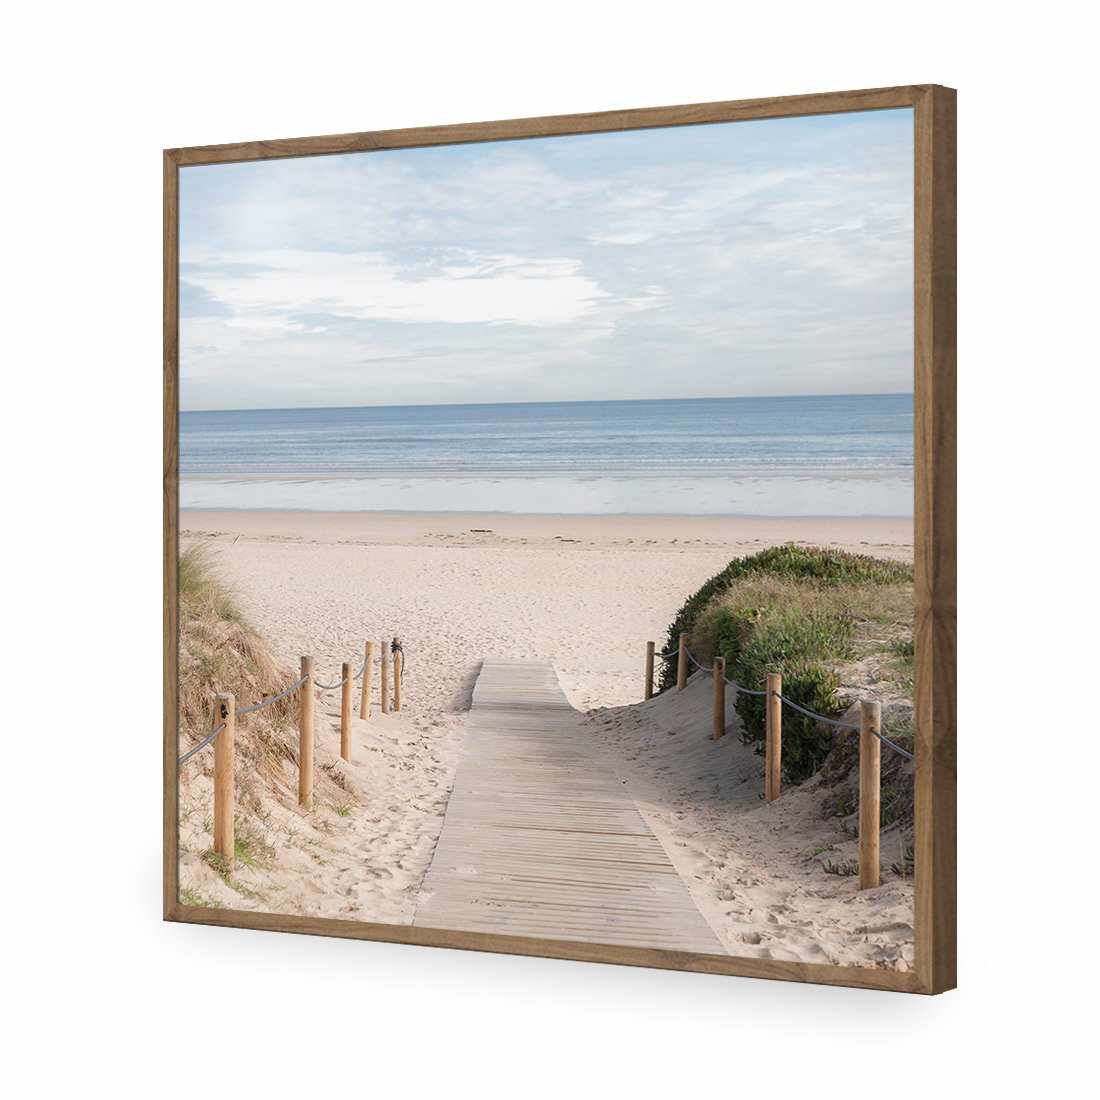 Pathway To The Sea, Square-Acrylic-Wall Art Design-Without Border-Acrylic - Natural Frame-37x37cm-Wall Art Designs